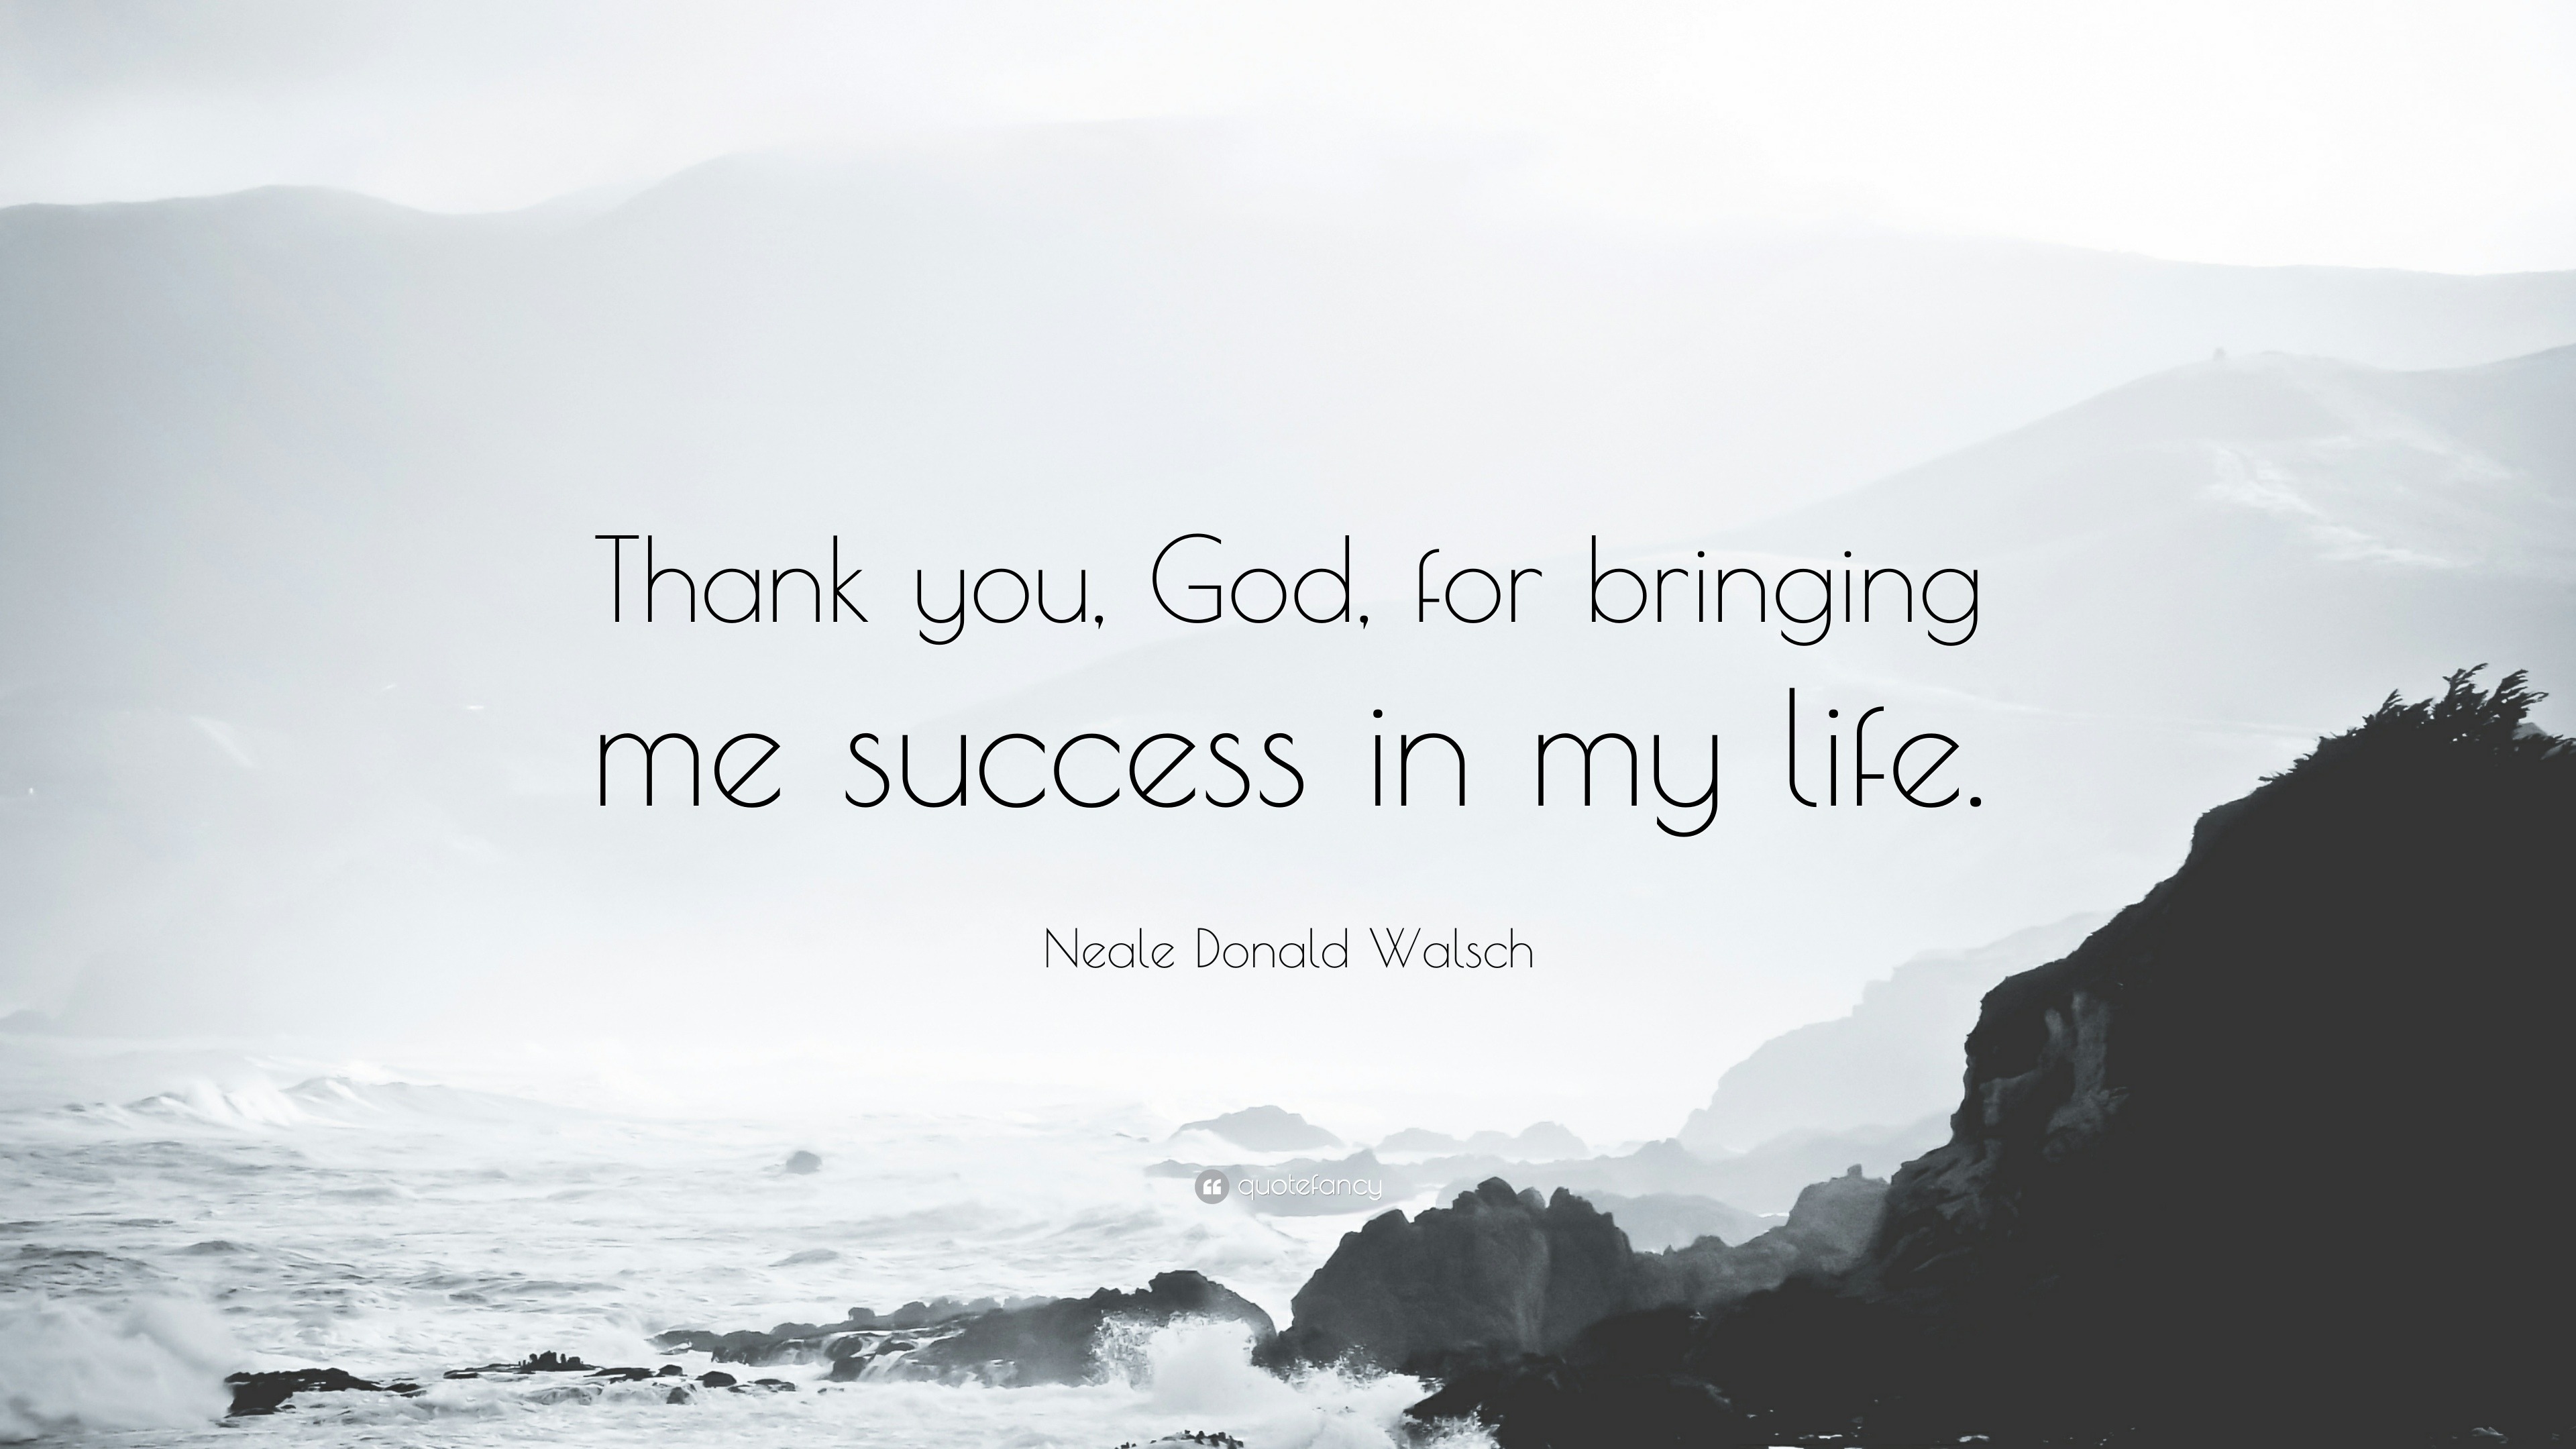 Neale Donald Walsch Quote “Thank you God for bringing me success in